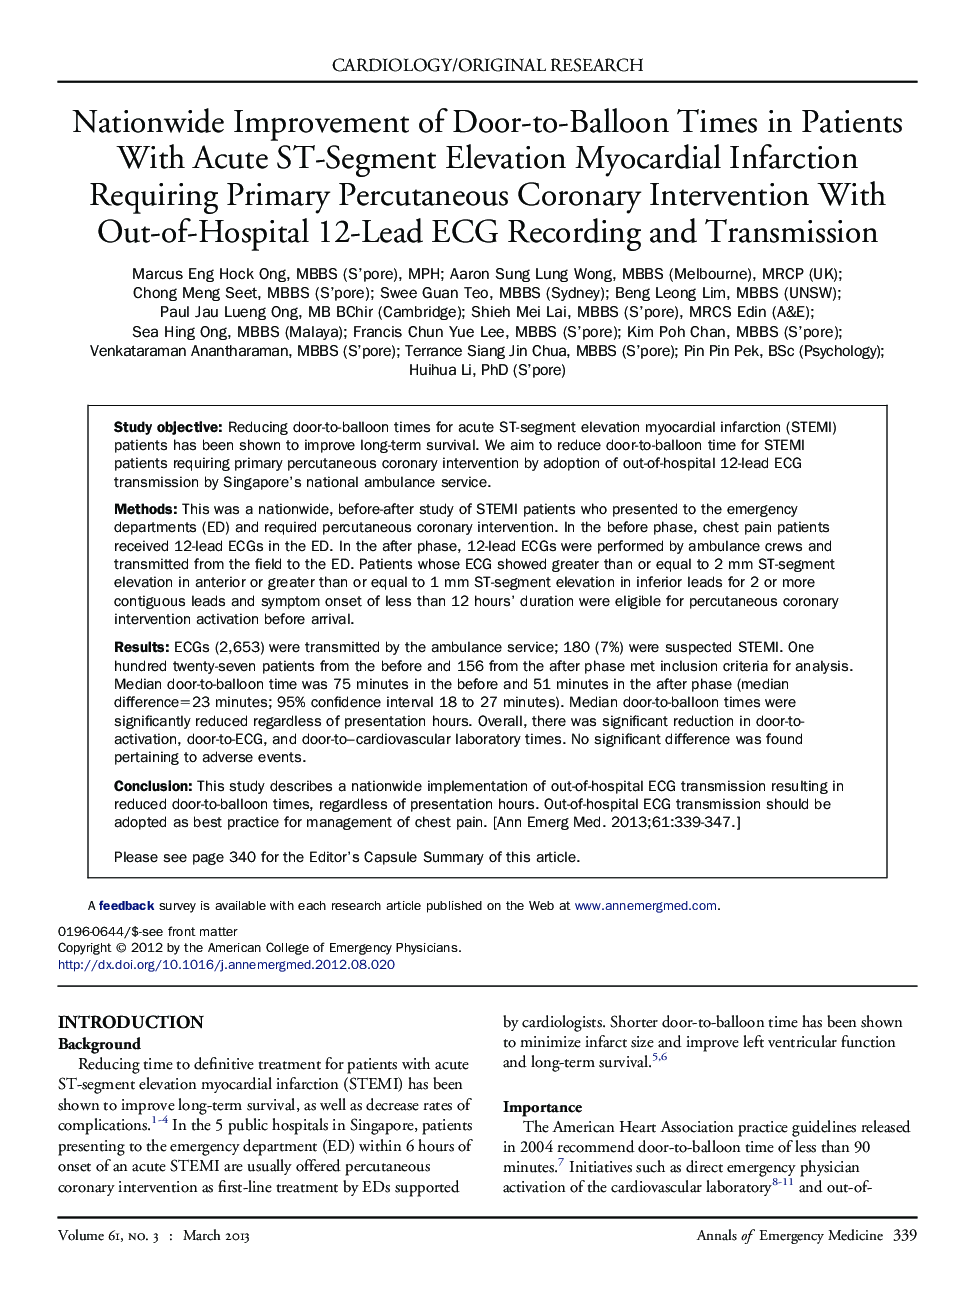 Nationwide Improvement of Door-to-Balloon Times in Patients With Acute ST-Segment Elevation Myocardial Infarction Requiring Primary Percutaneous Coronary Intervention With Out-of-Hospital 12-Lead ECG Recording and Transmission 